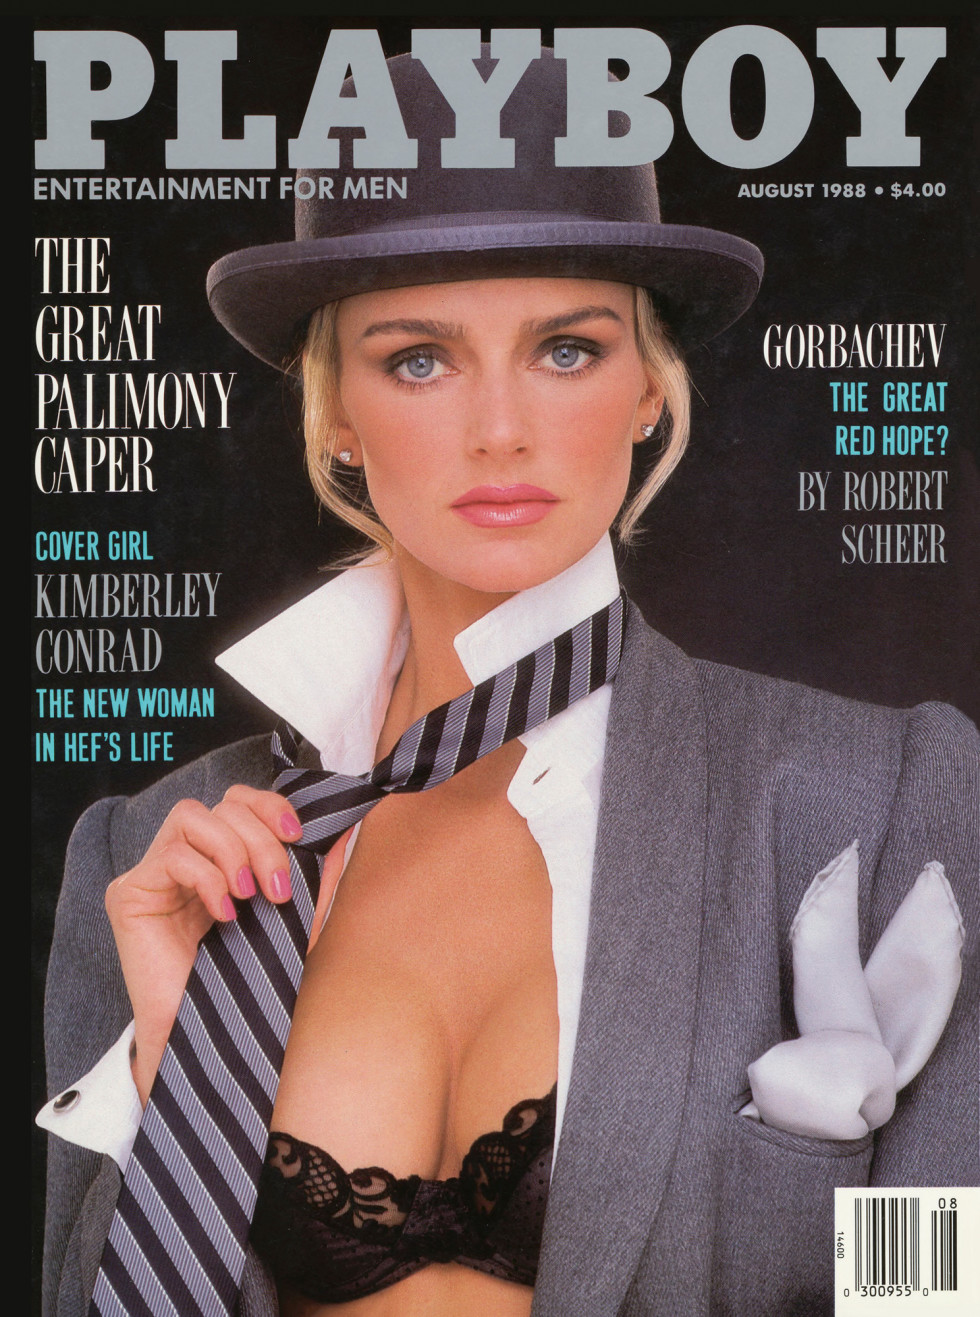 7 Playboy Bunnies Recreate Their Iconic Covers 30 Years Later